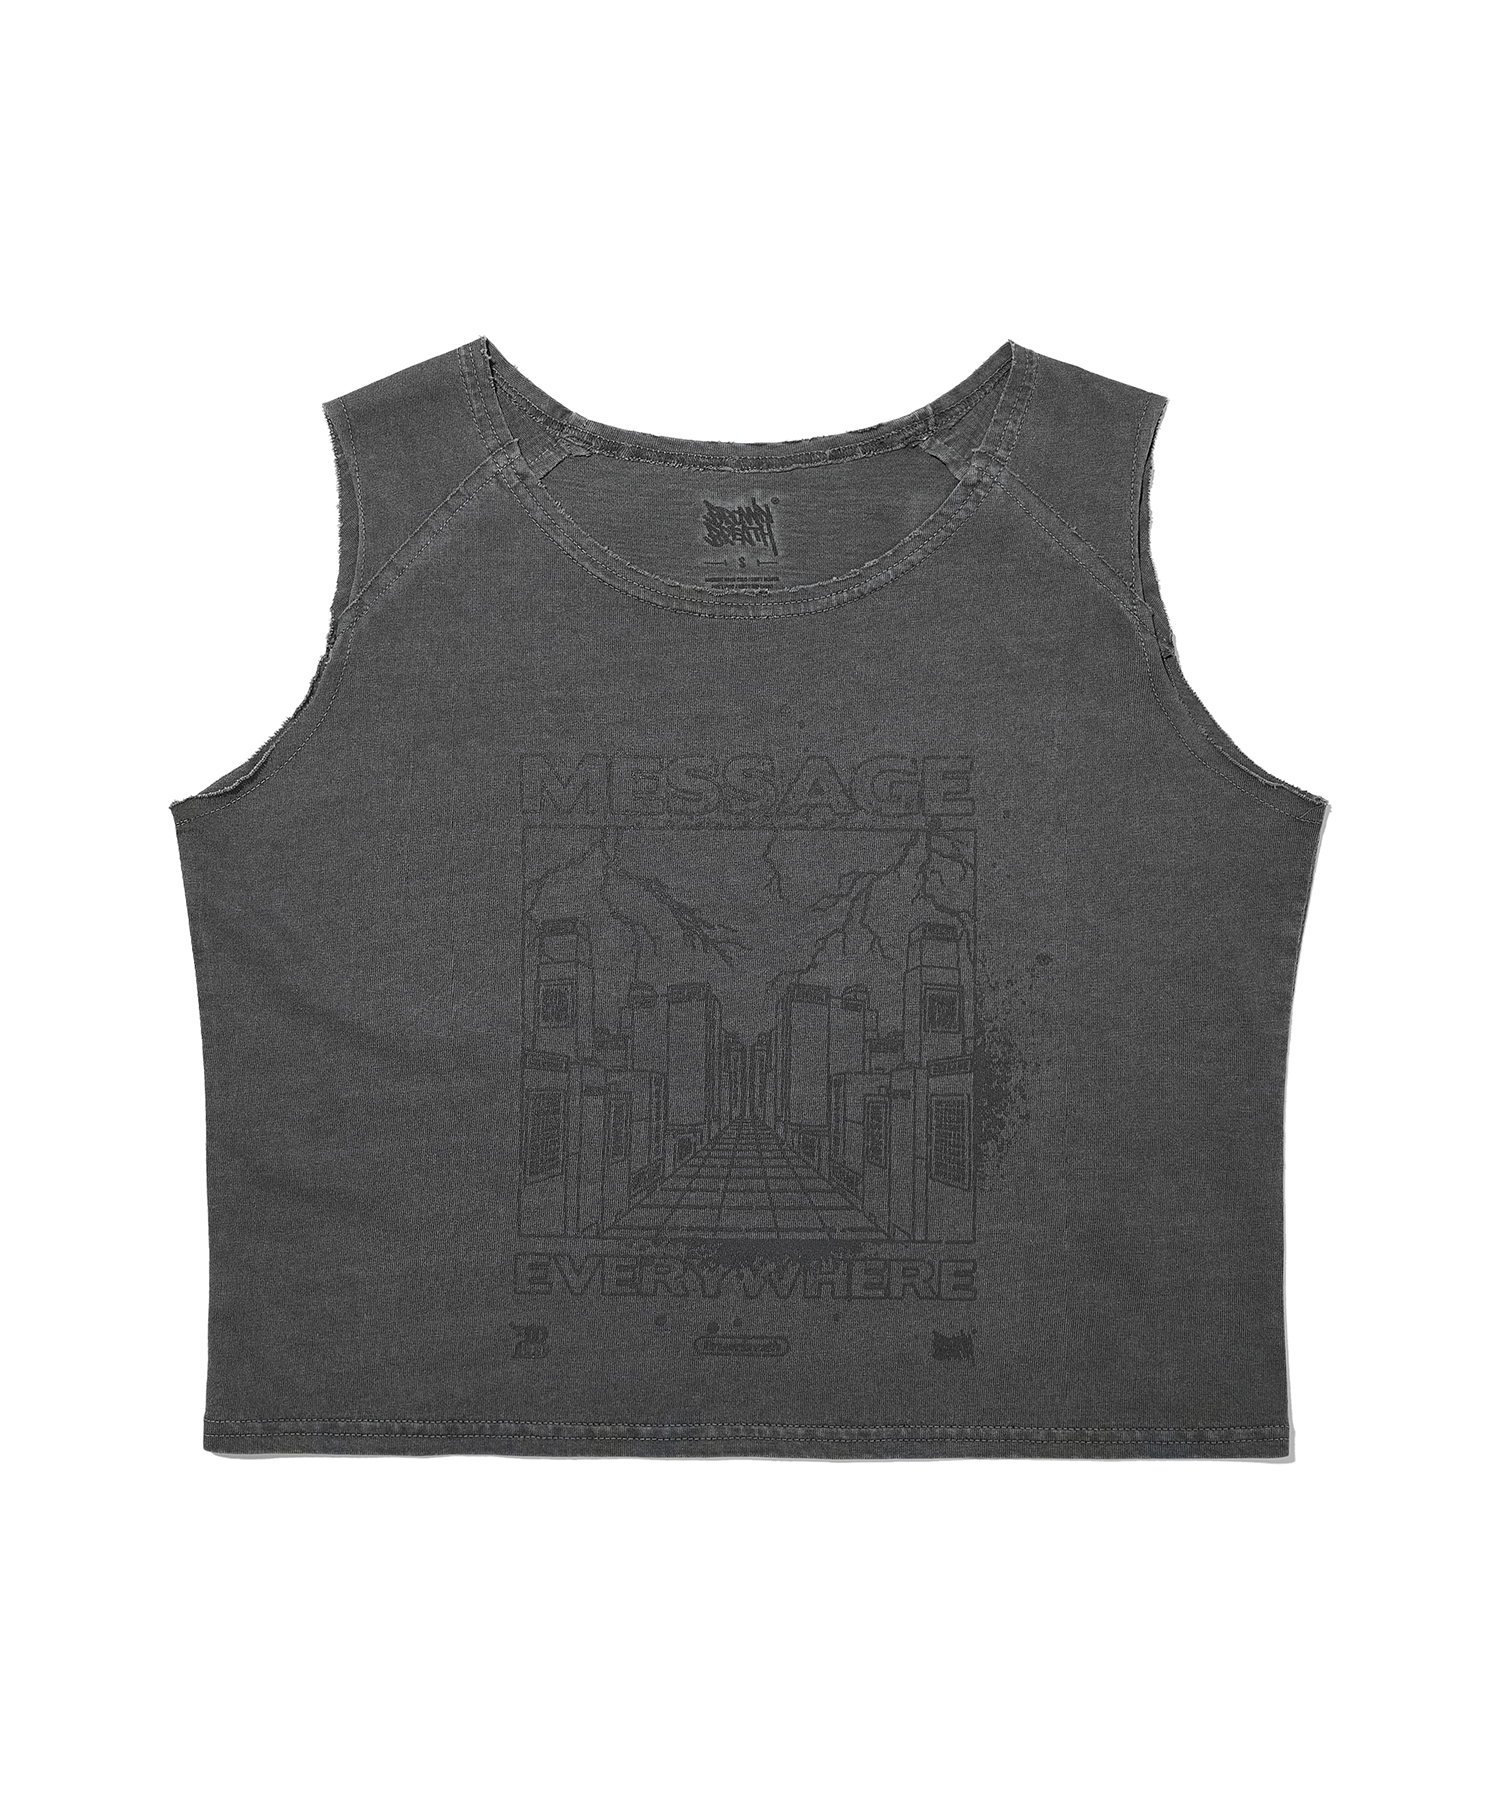 W VINTAGE PIGMENT SLEEVELESS - CHARCOAL brownbreath